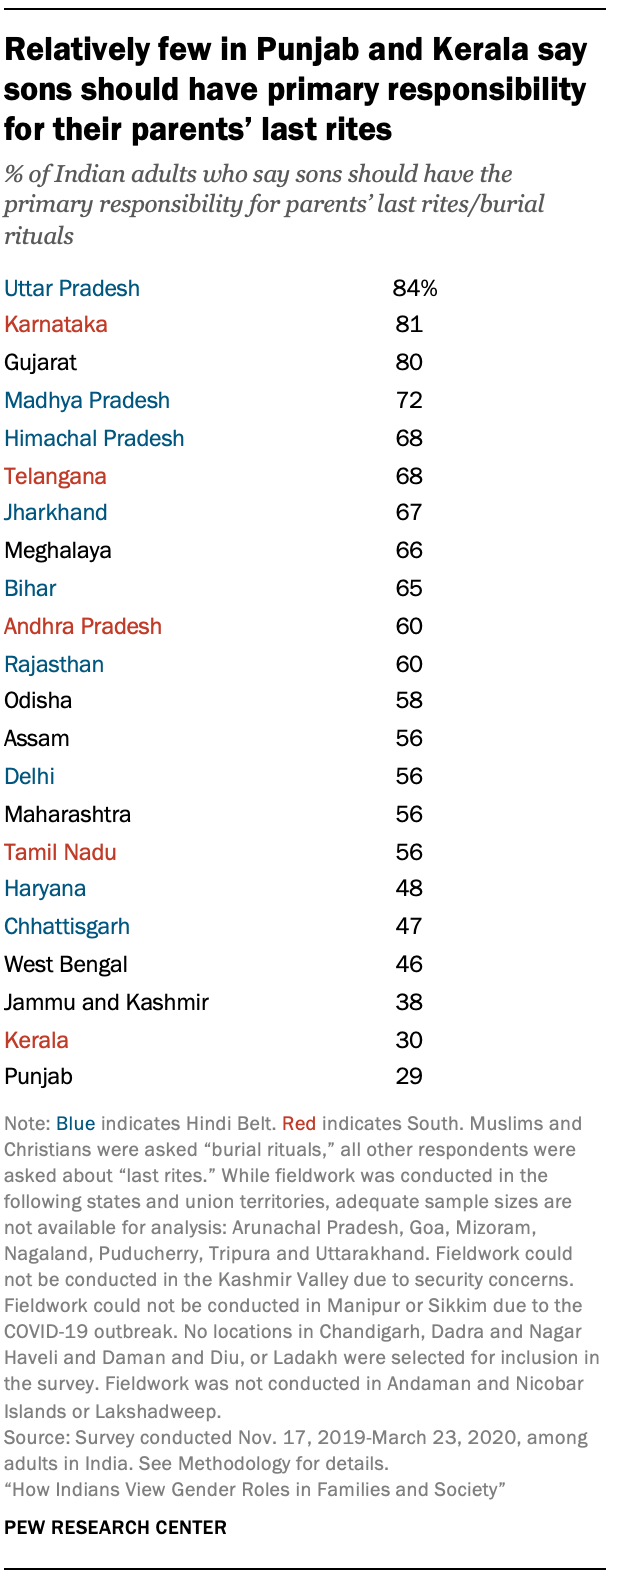 Relatively few in Punjab and Kerala say sons should have primary responsibility for their parents’ last rites